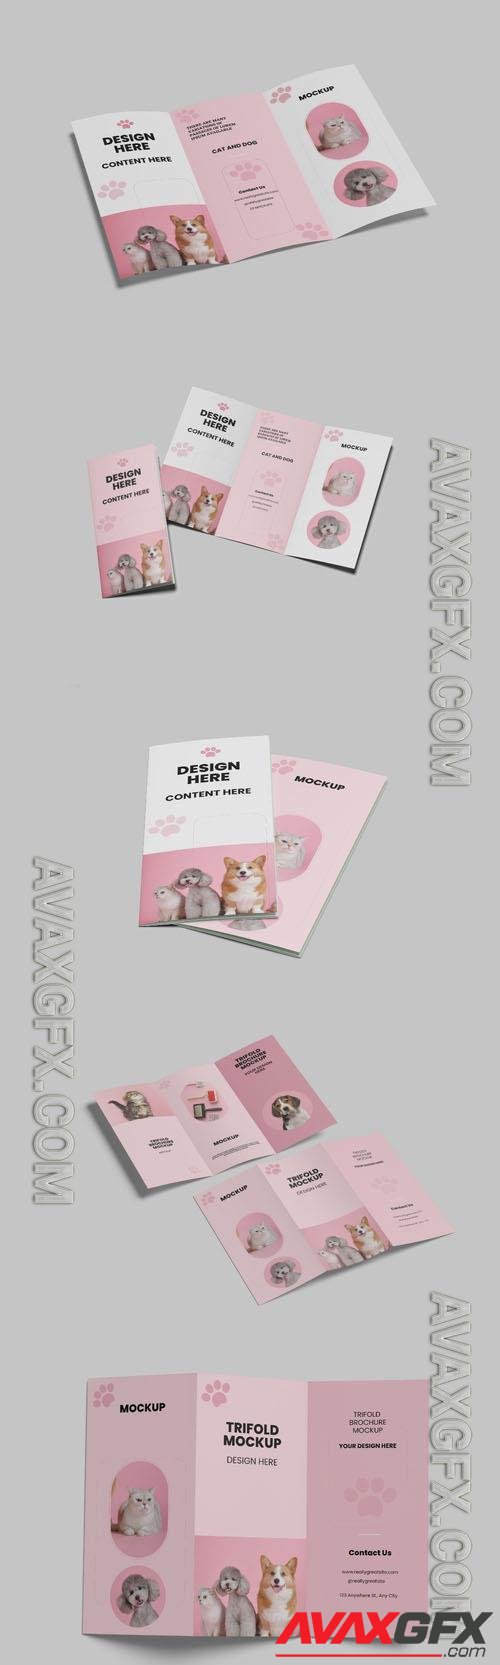 Trifold pink and white design psd brochure mockup